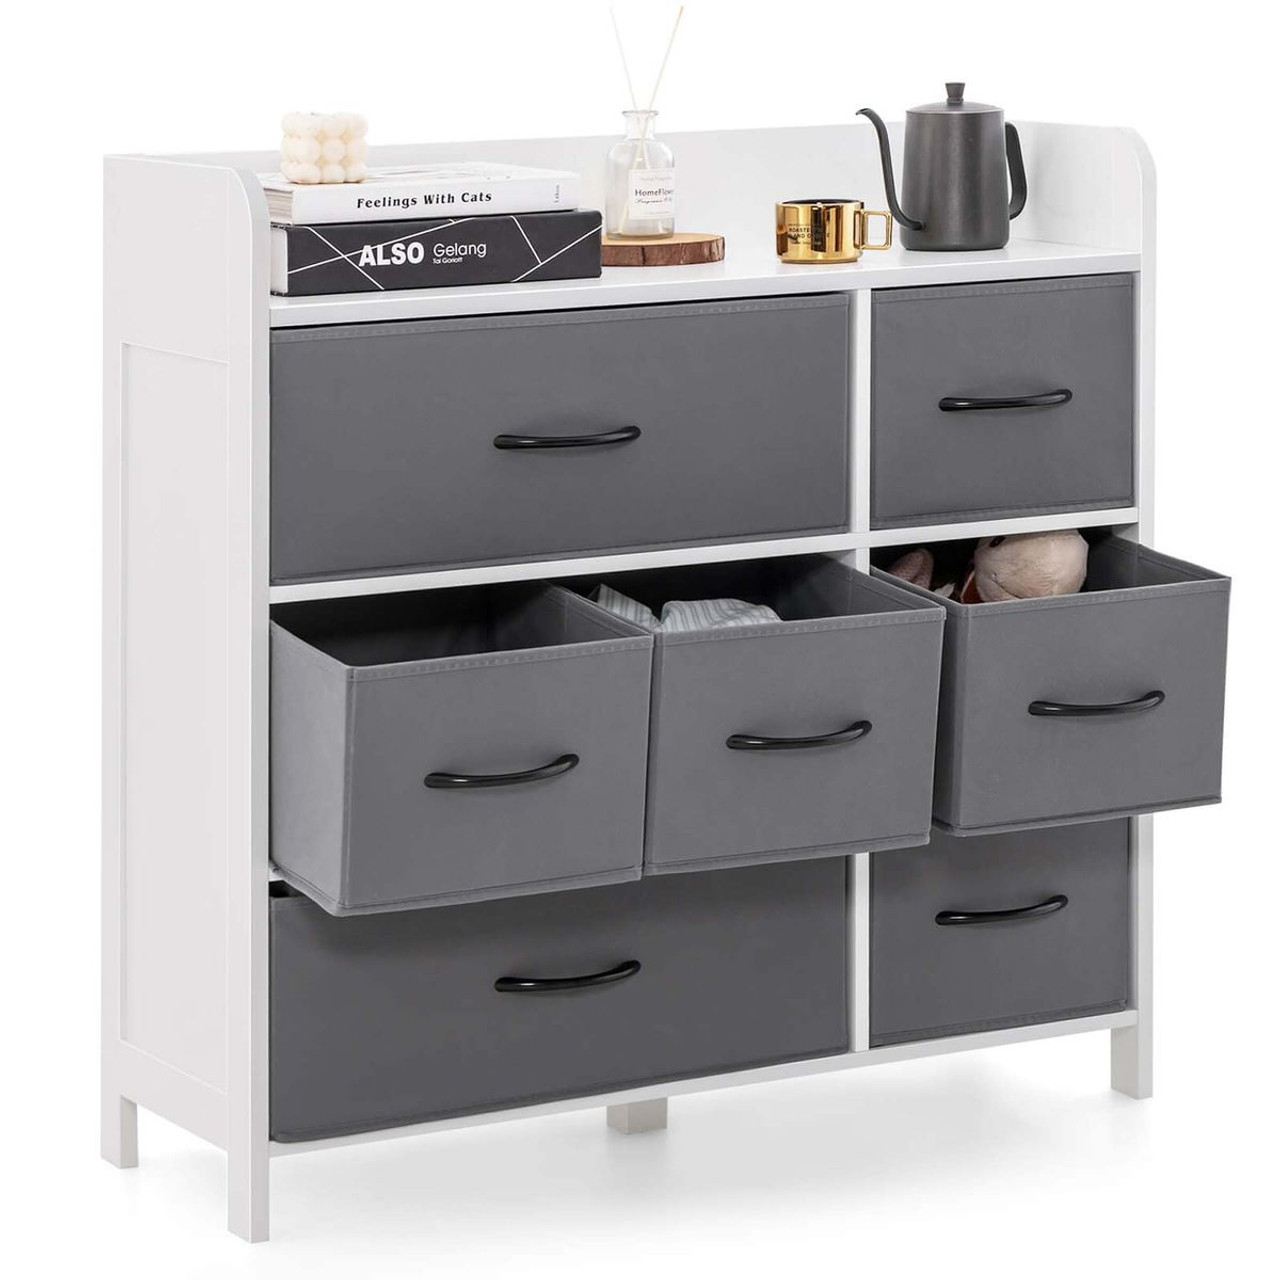 Fabric Dresser with 5 or 7 Drawers product image